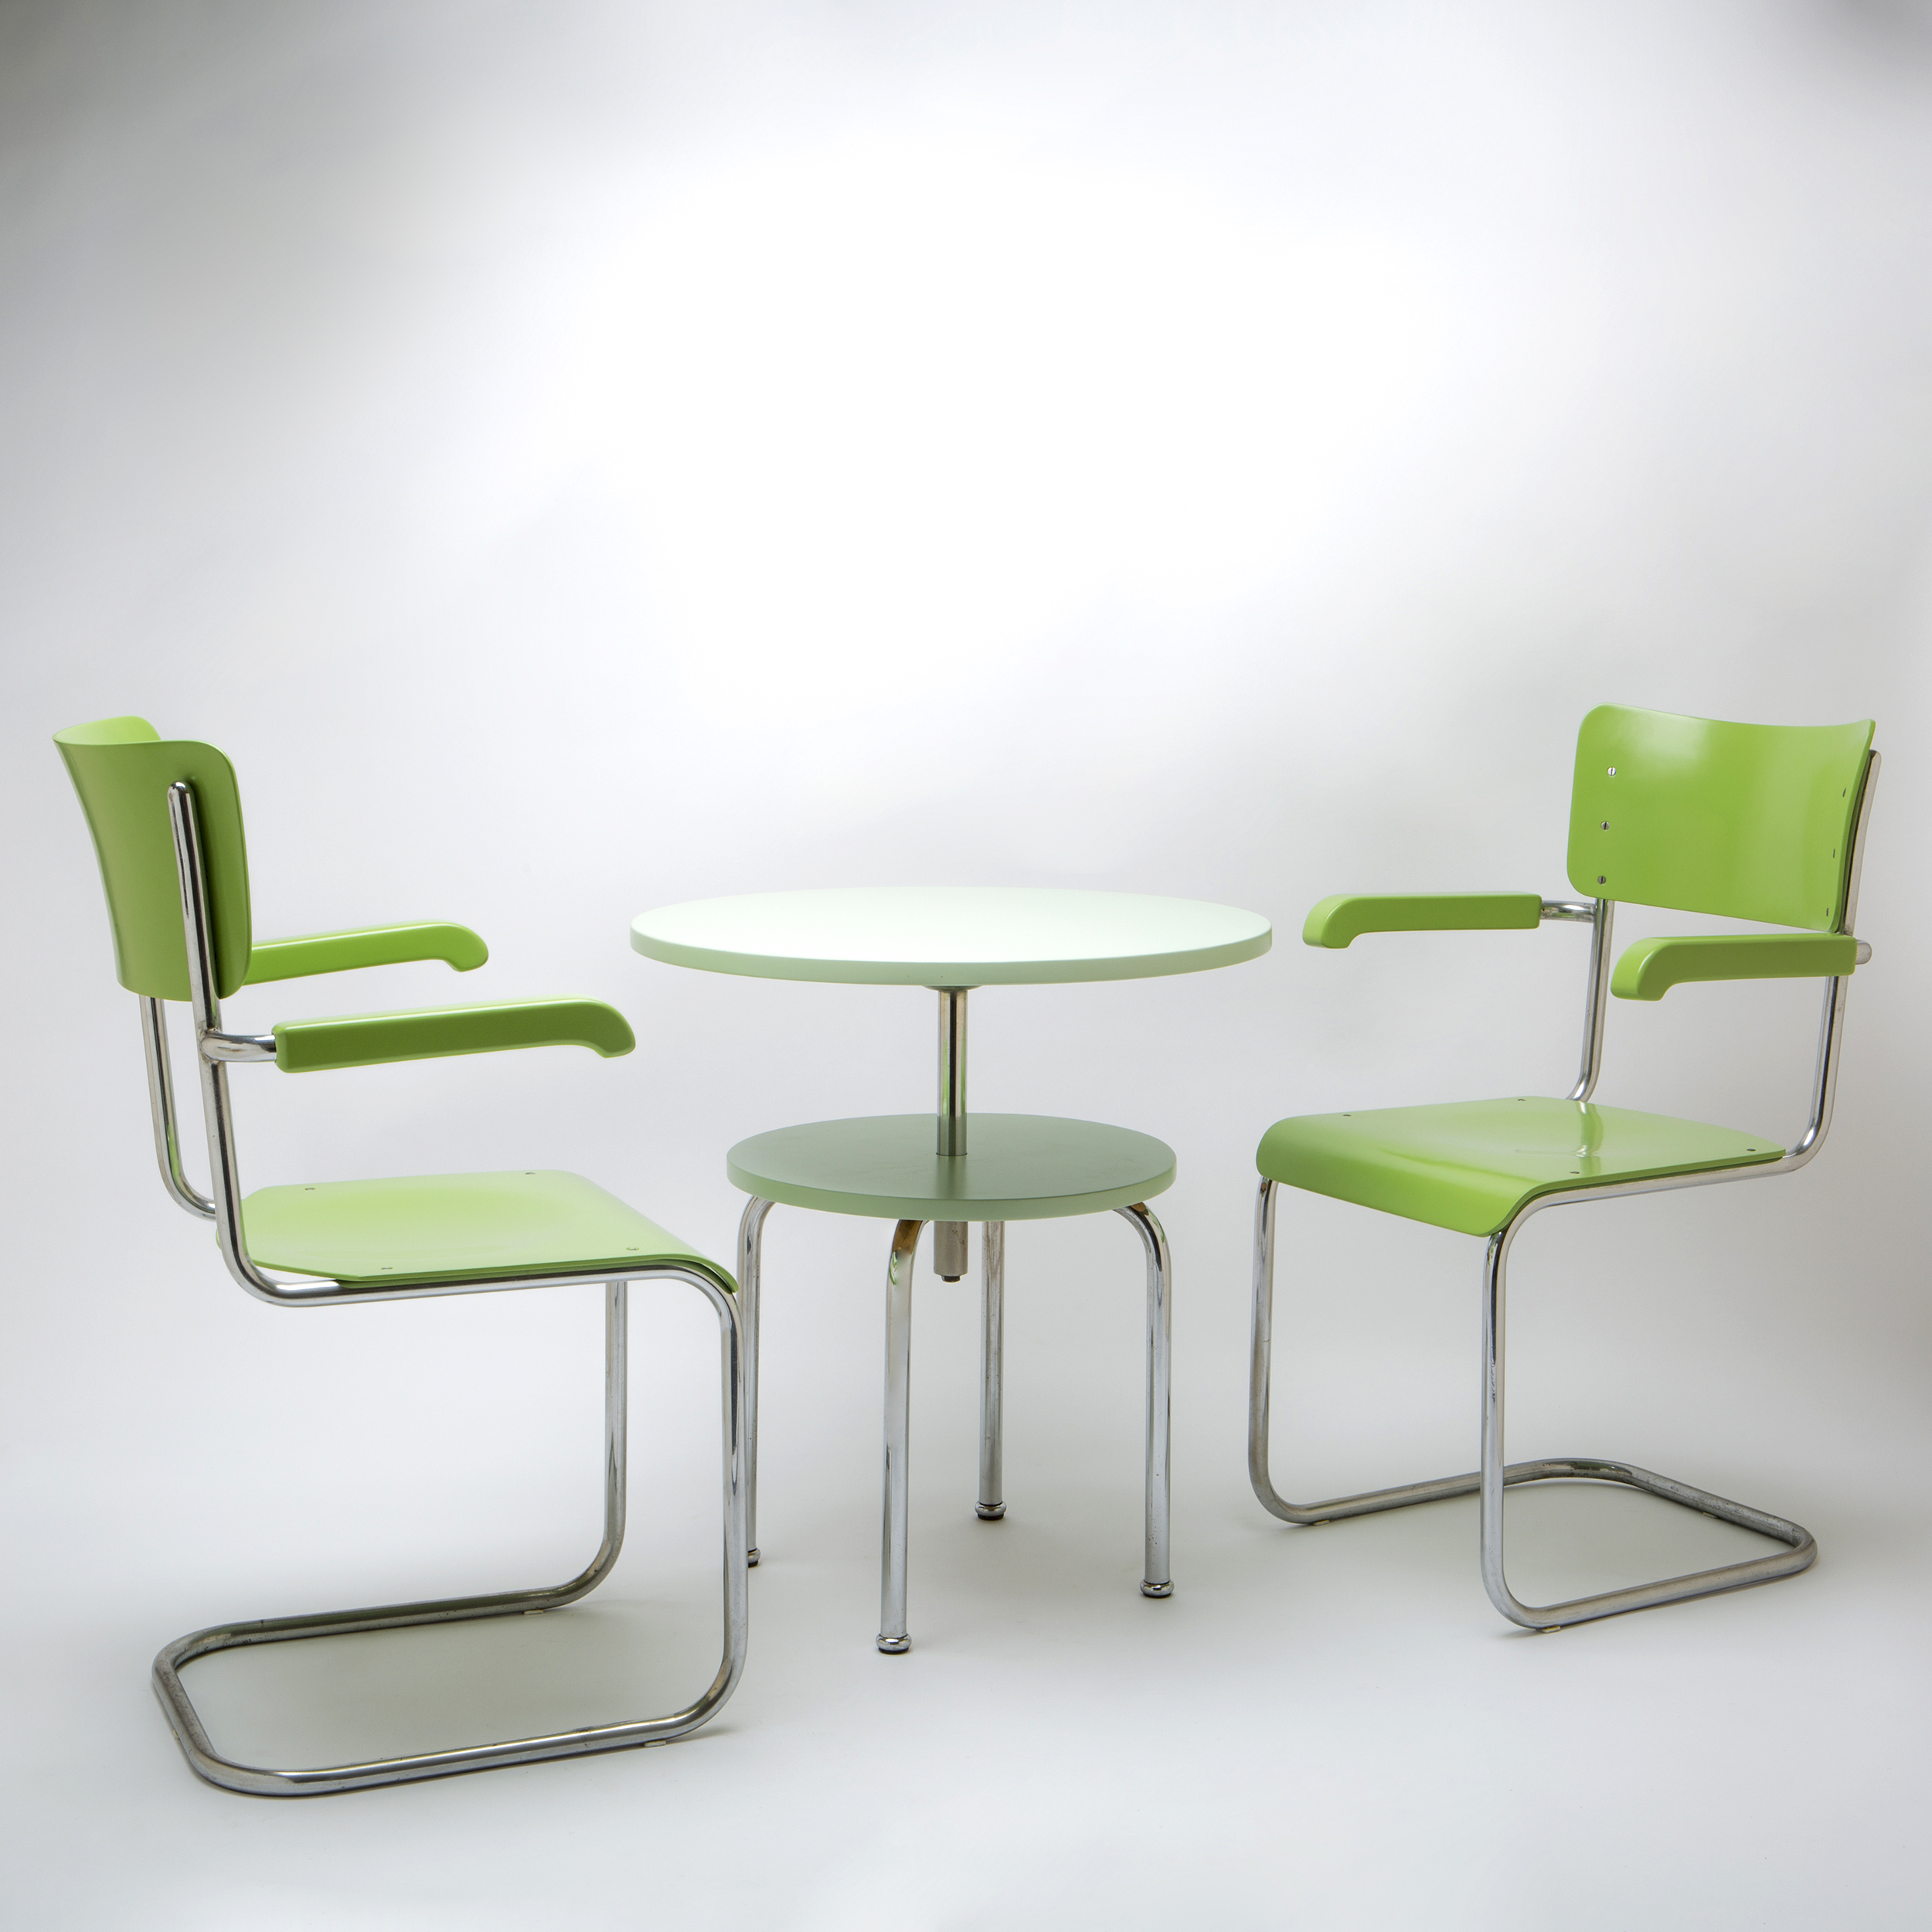 Funkcionalismus round table 1053 chairs 1238, functionalism